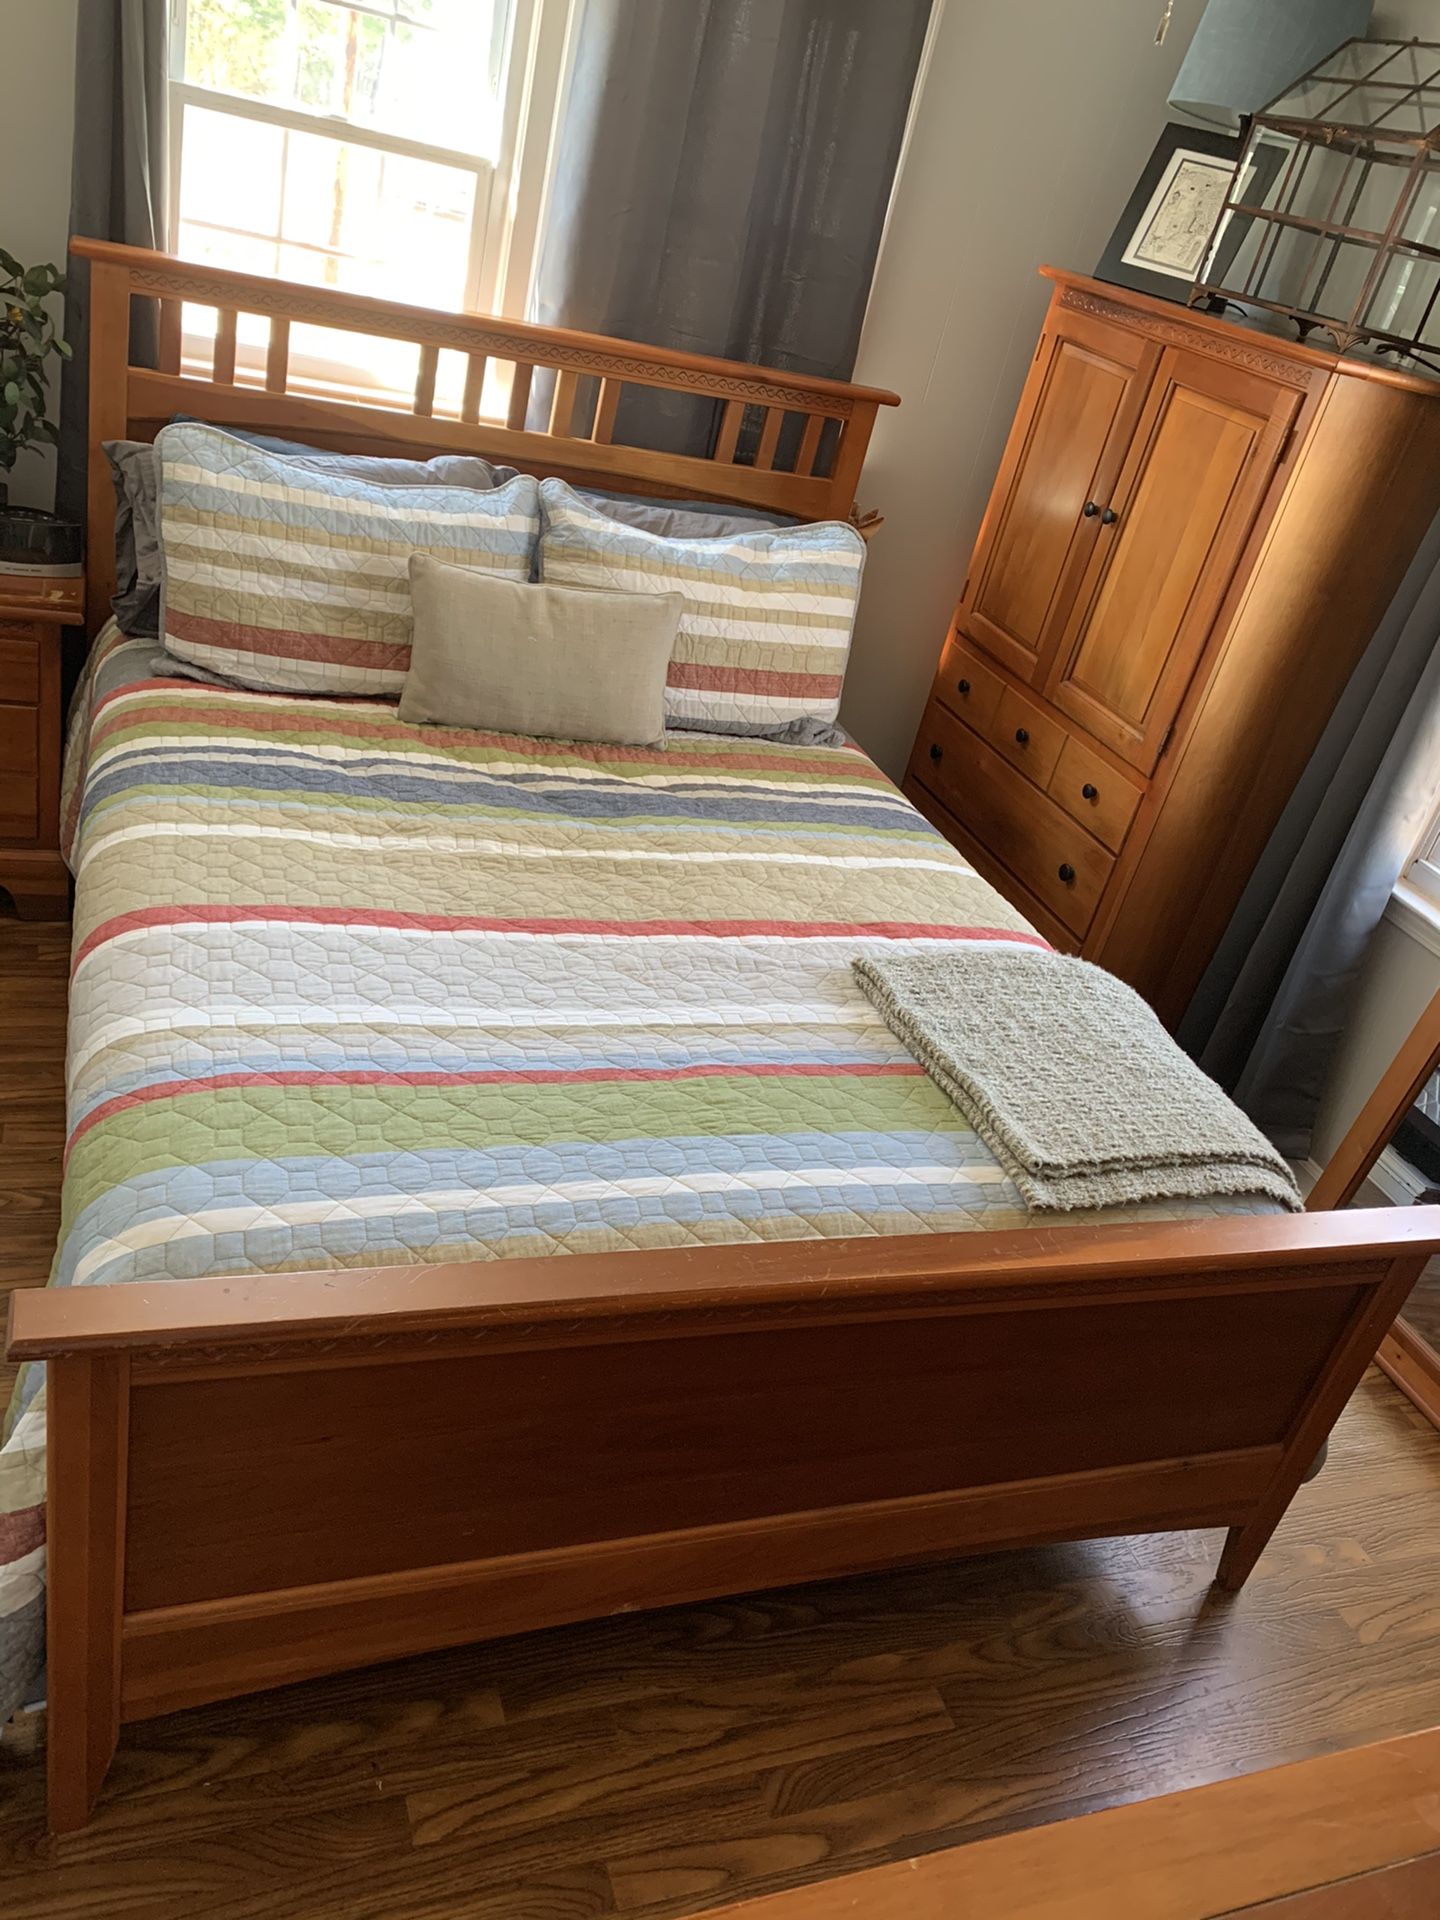 Wooden Bed Frame Only (Headboard & Footboard) Metal Rails “Mattress Set Not Included”